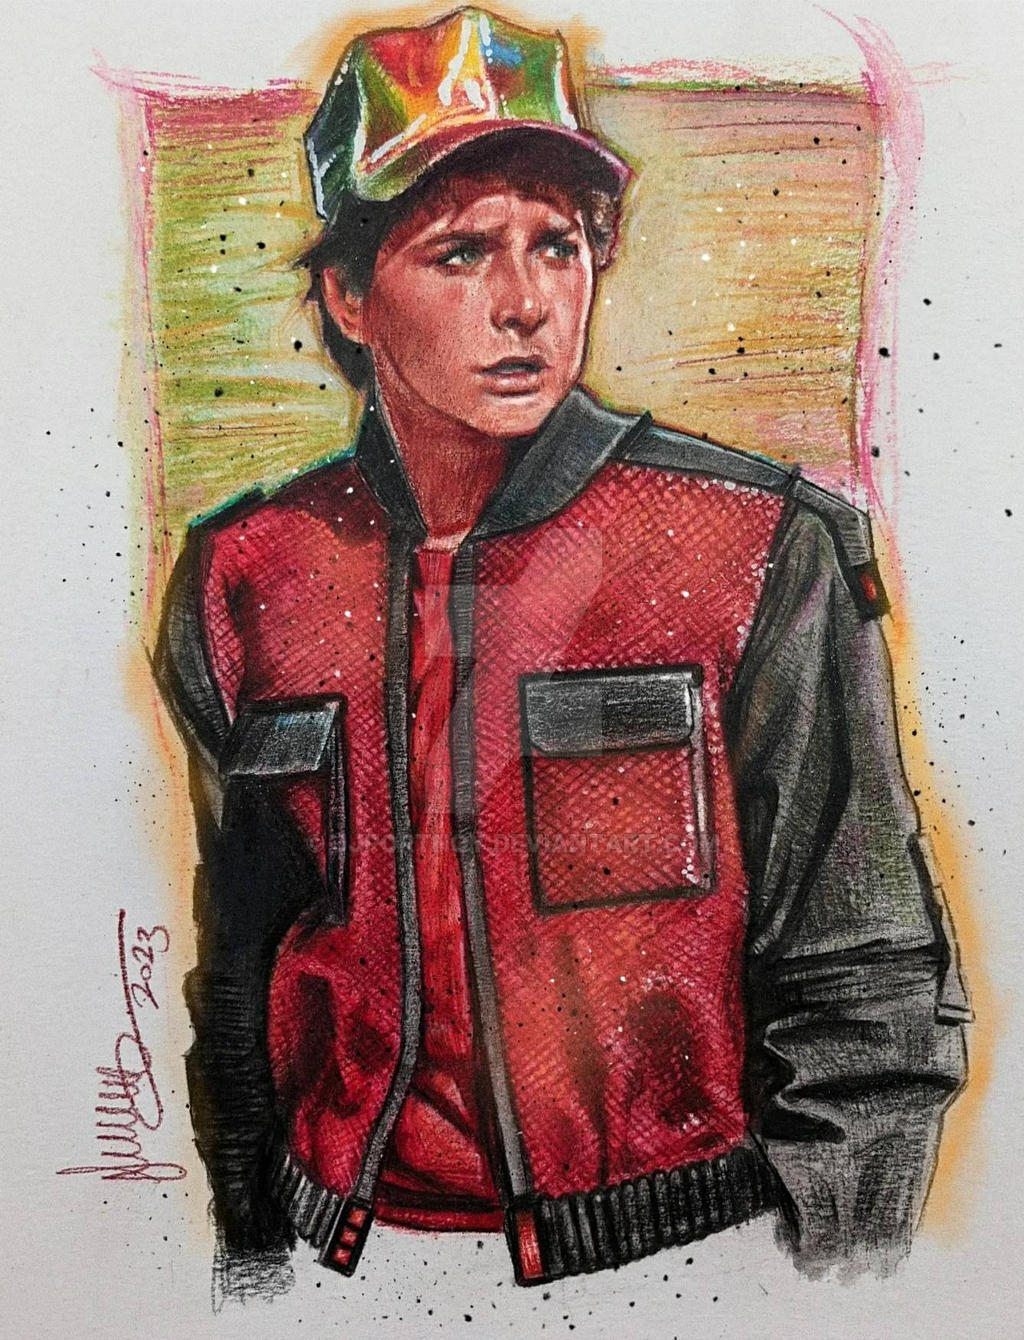 Marty Mcfly - Back to the Future print by 2ToastDesign